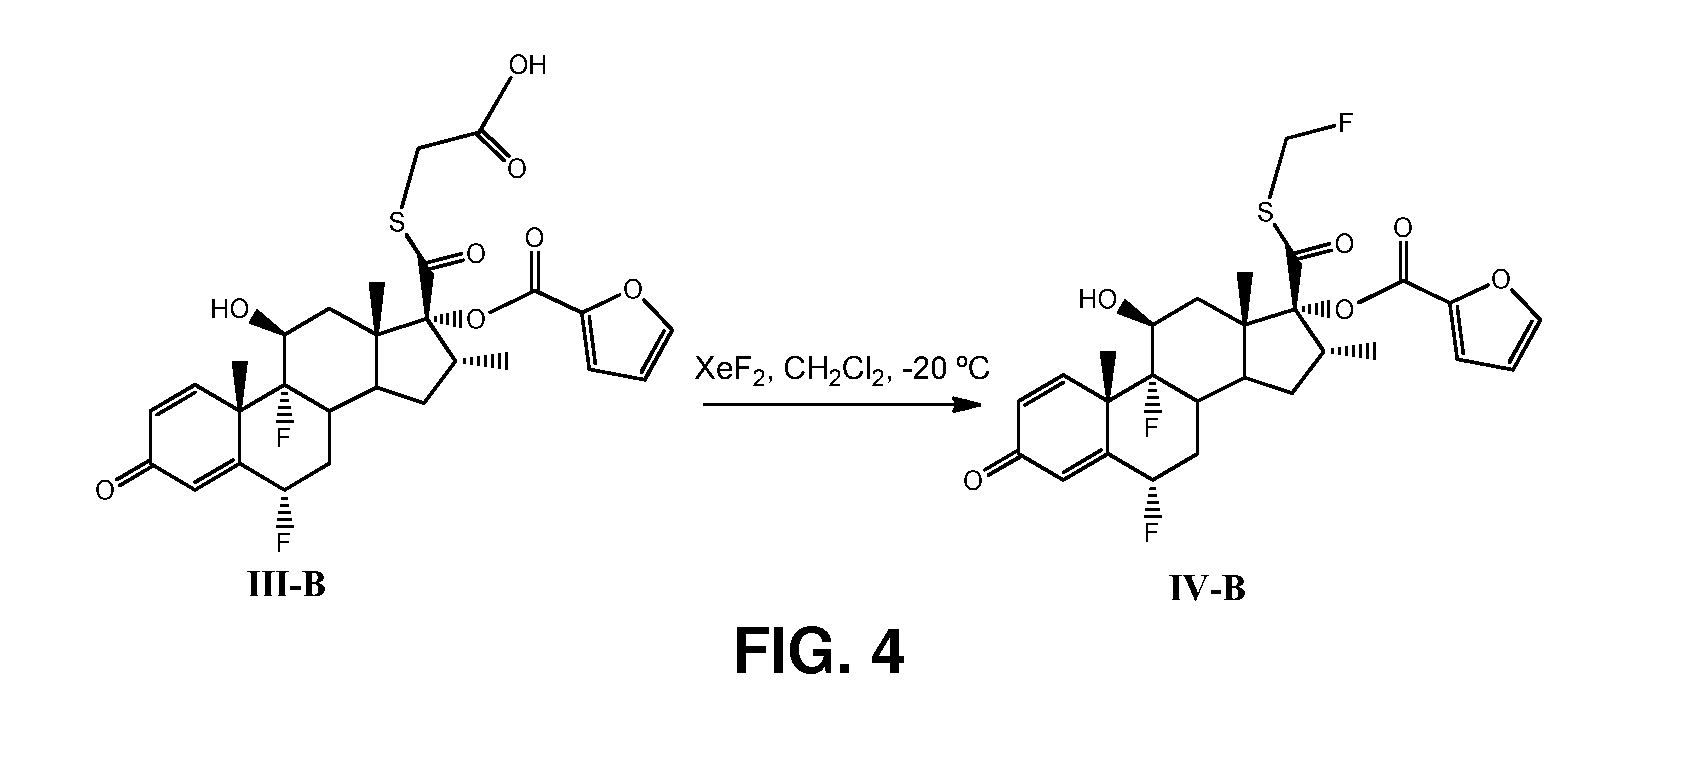 Method and Compounds for the Preparation of Monofluoromethylated Biologically Active Organic Compounds